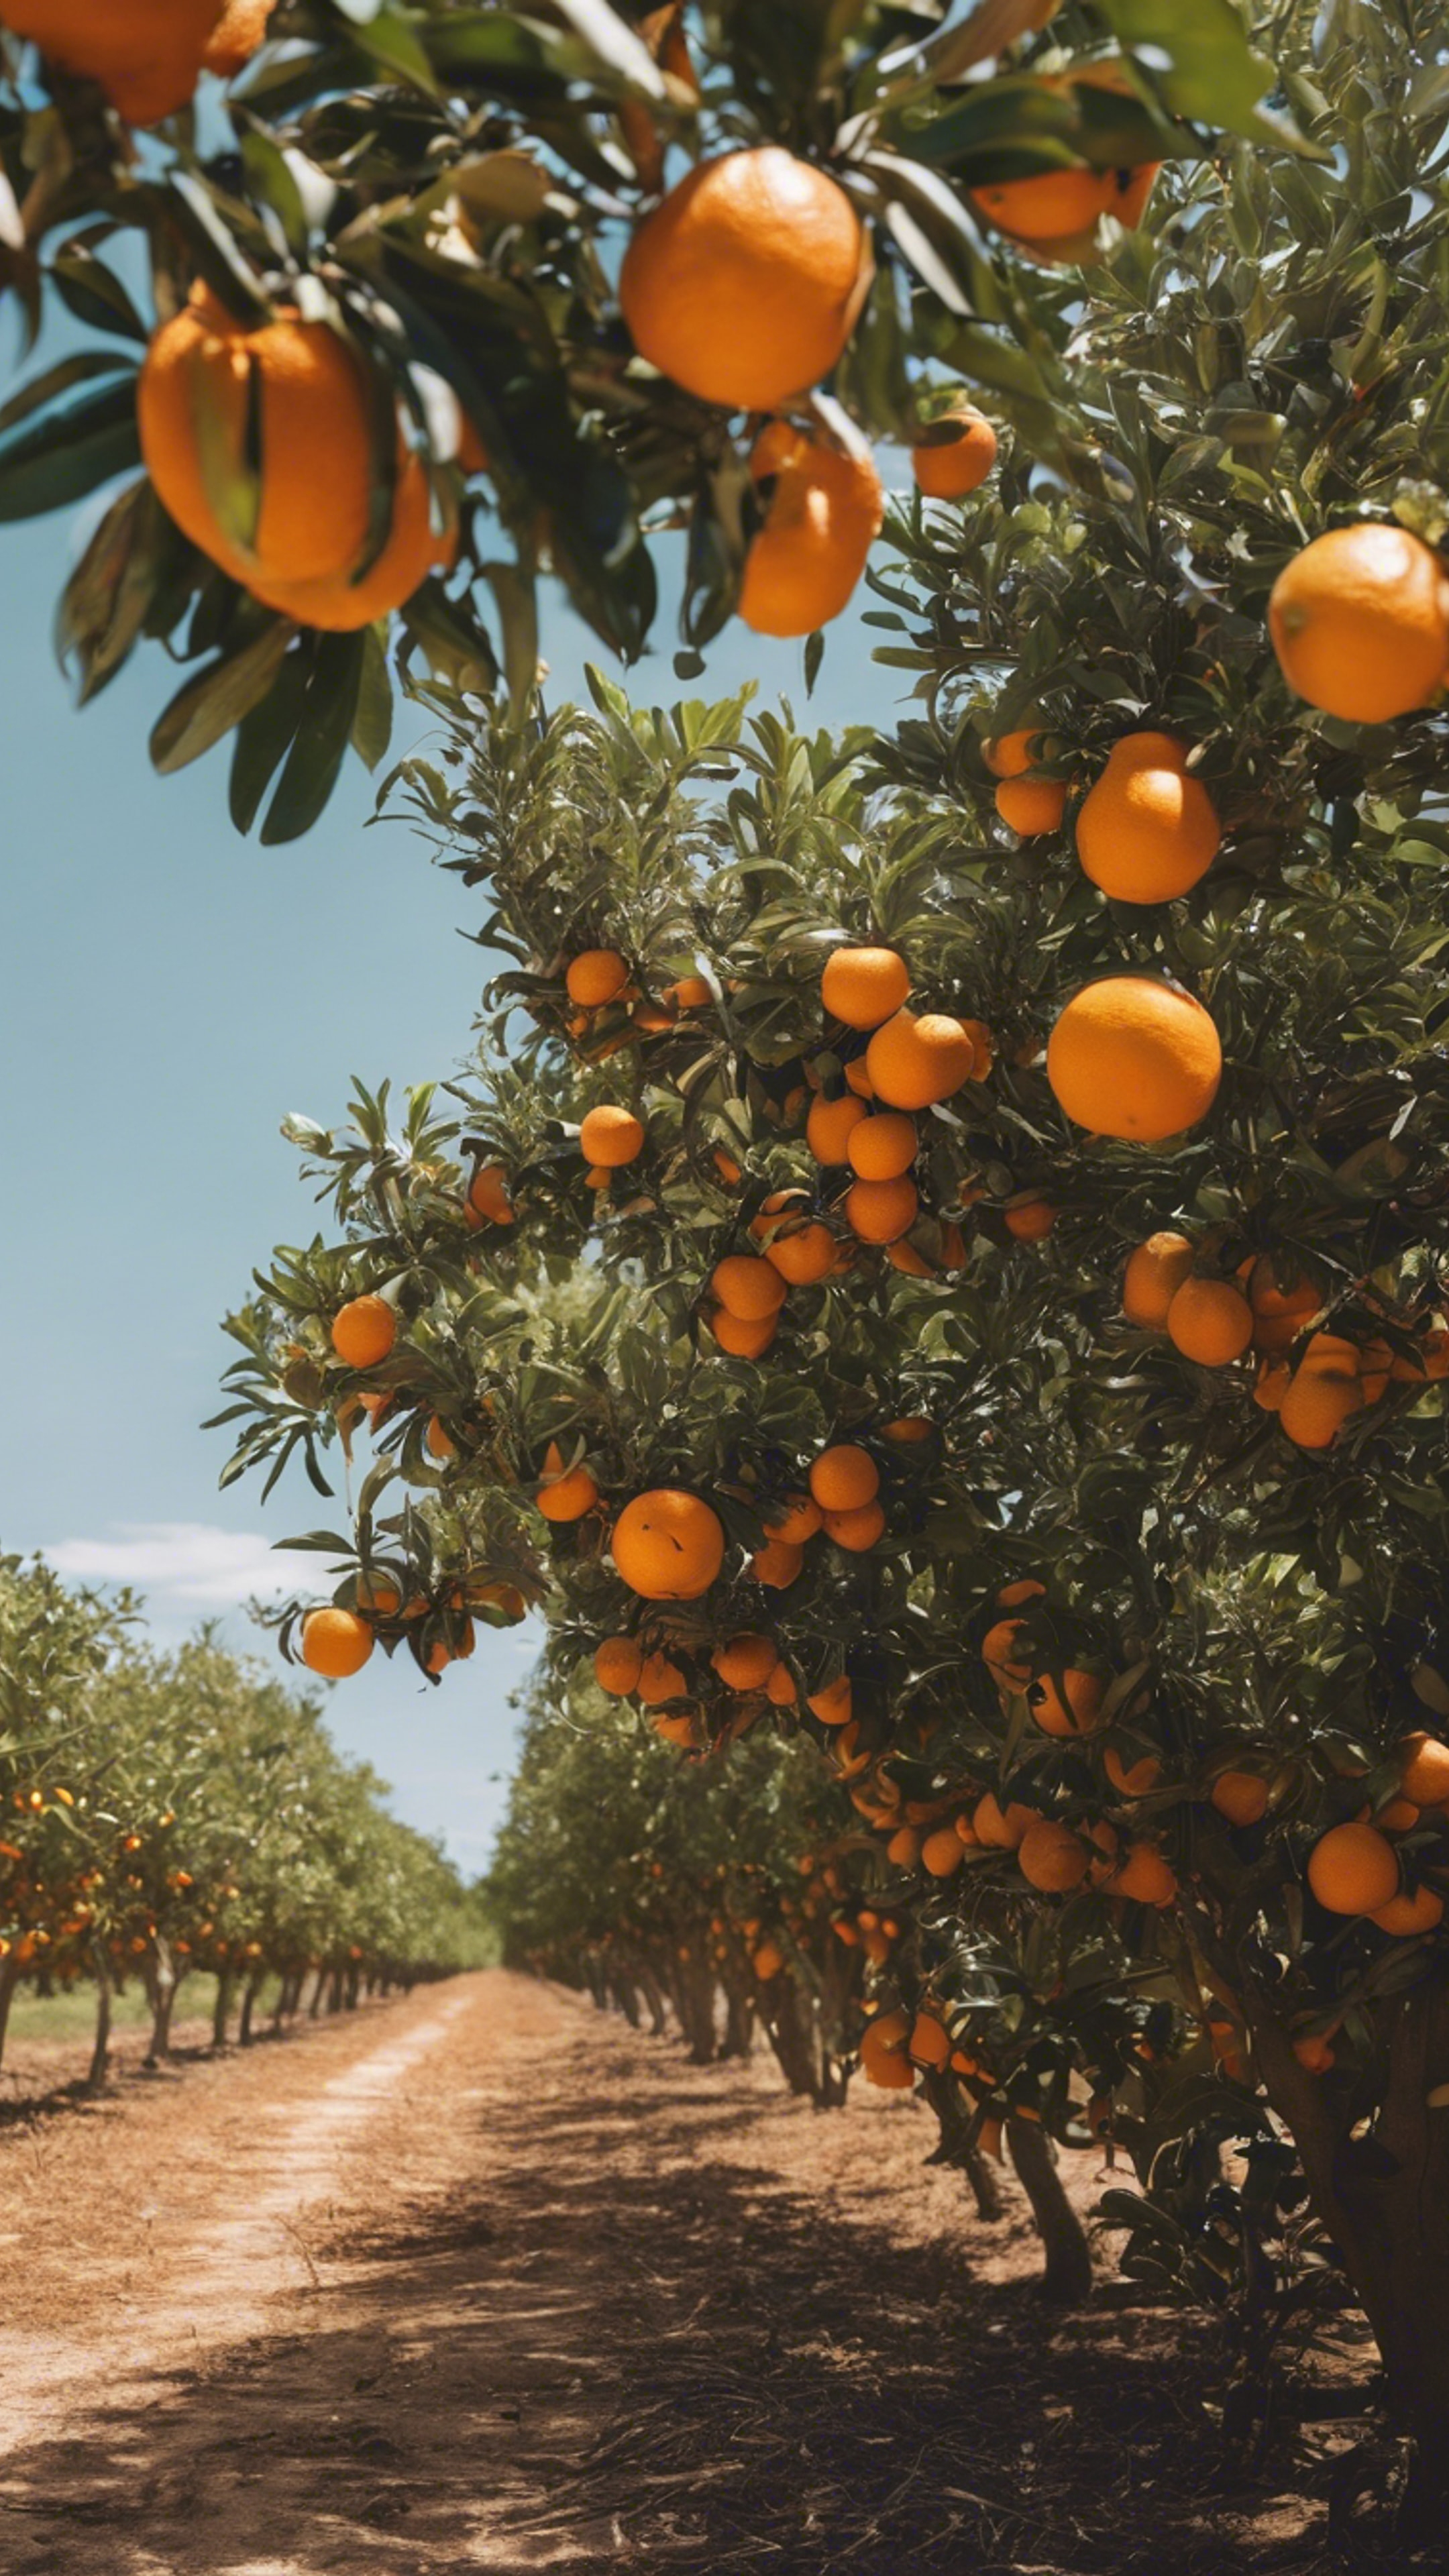 A Florida orange grove heavy with ripe fruit under a clear, sunny sky. Wallpaper[2198d7c823f5473d98f1]